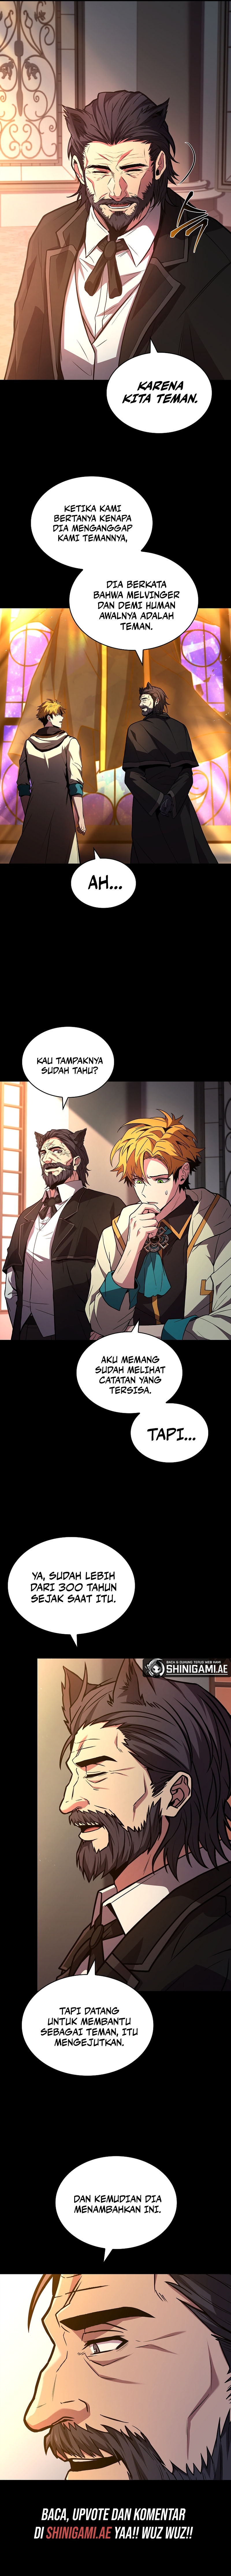 talent-swallowing-magician Chapter 67